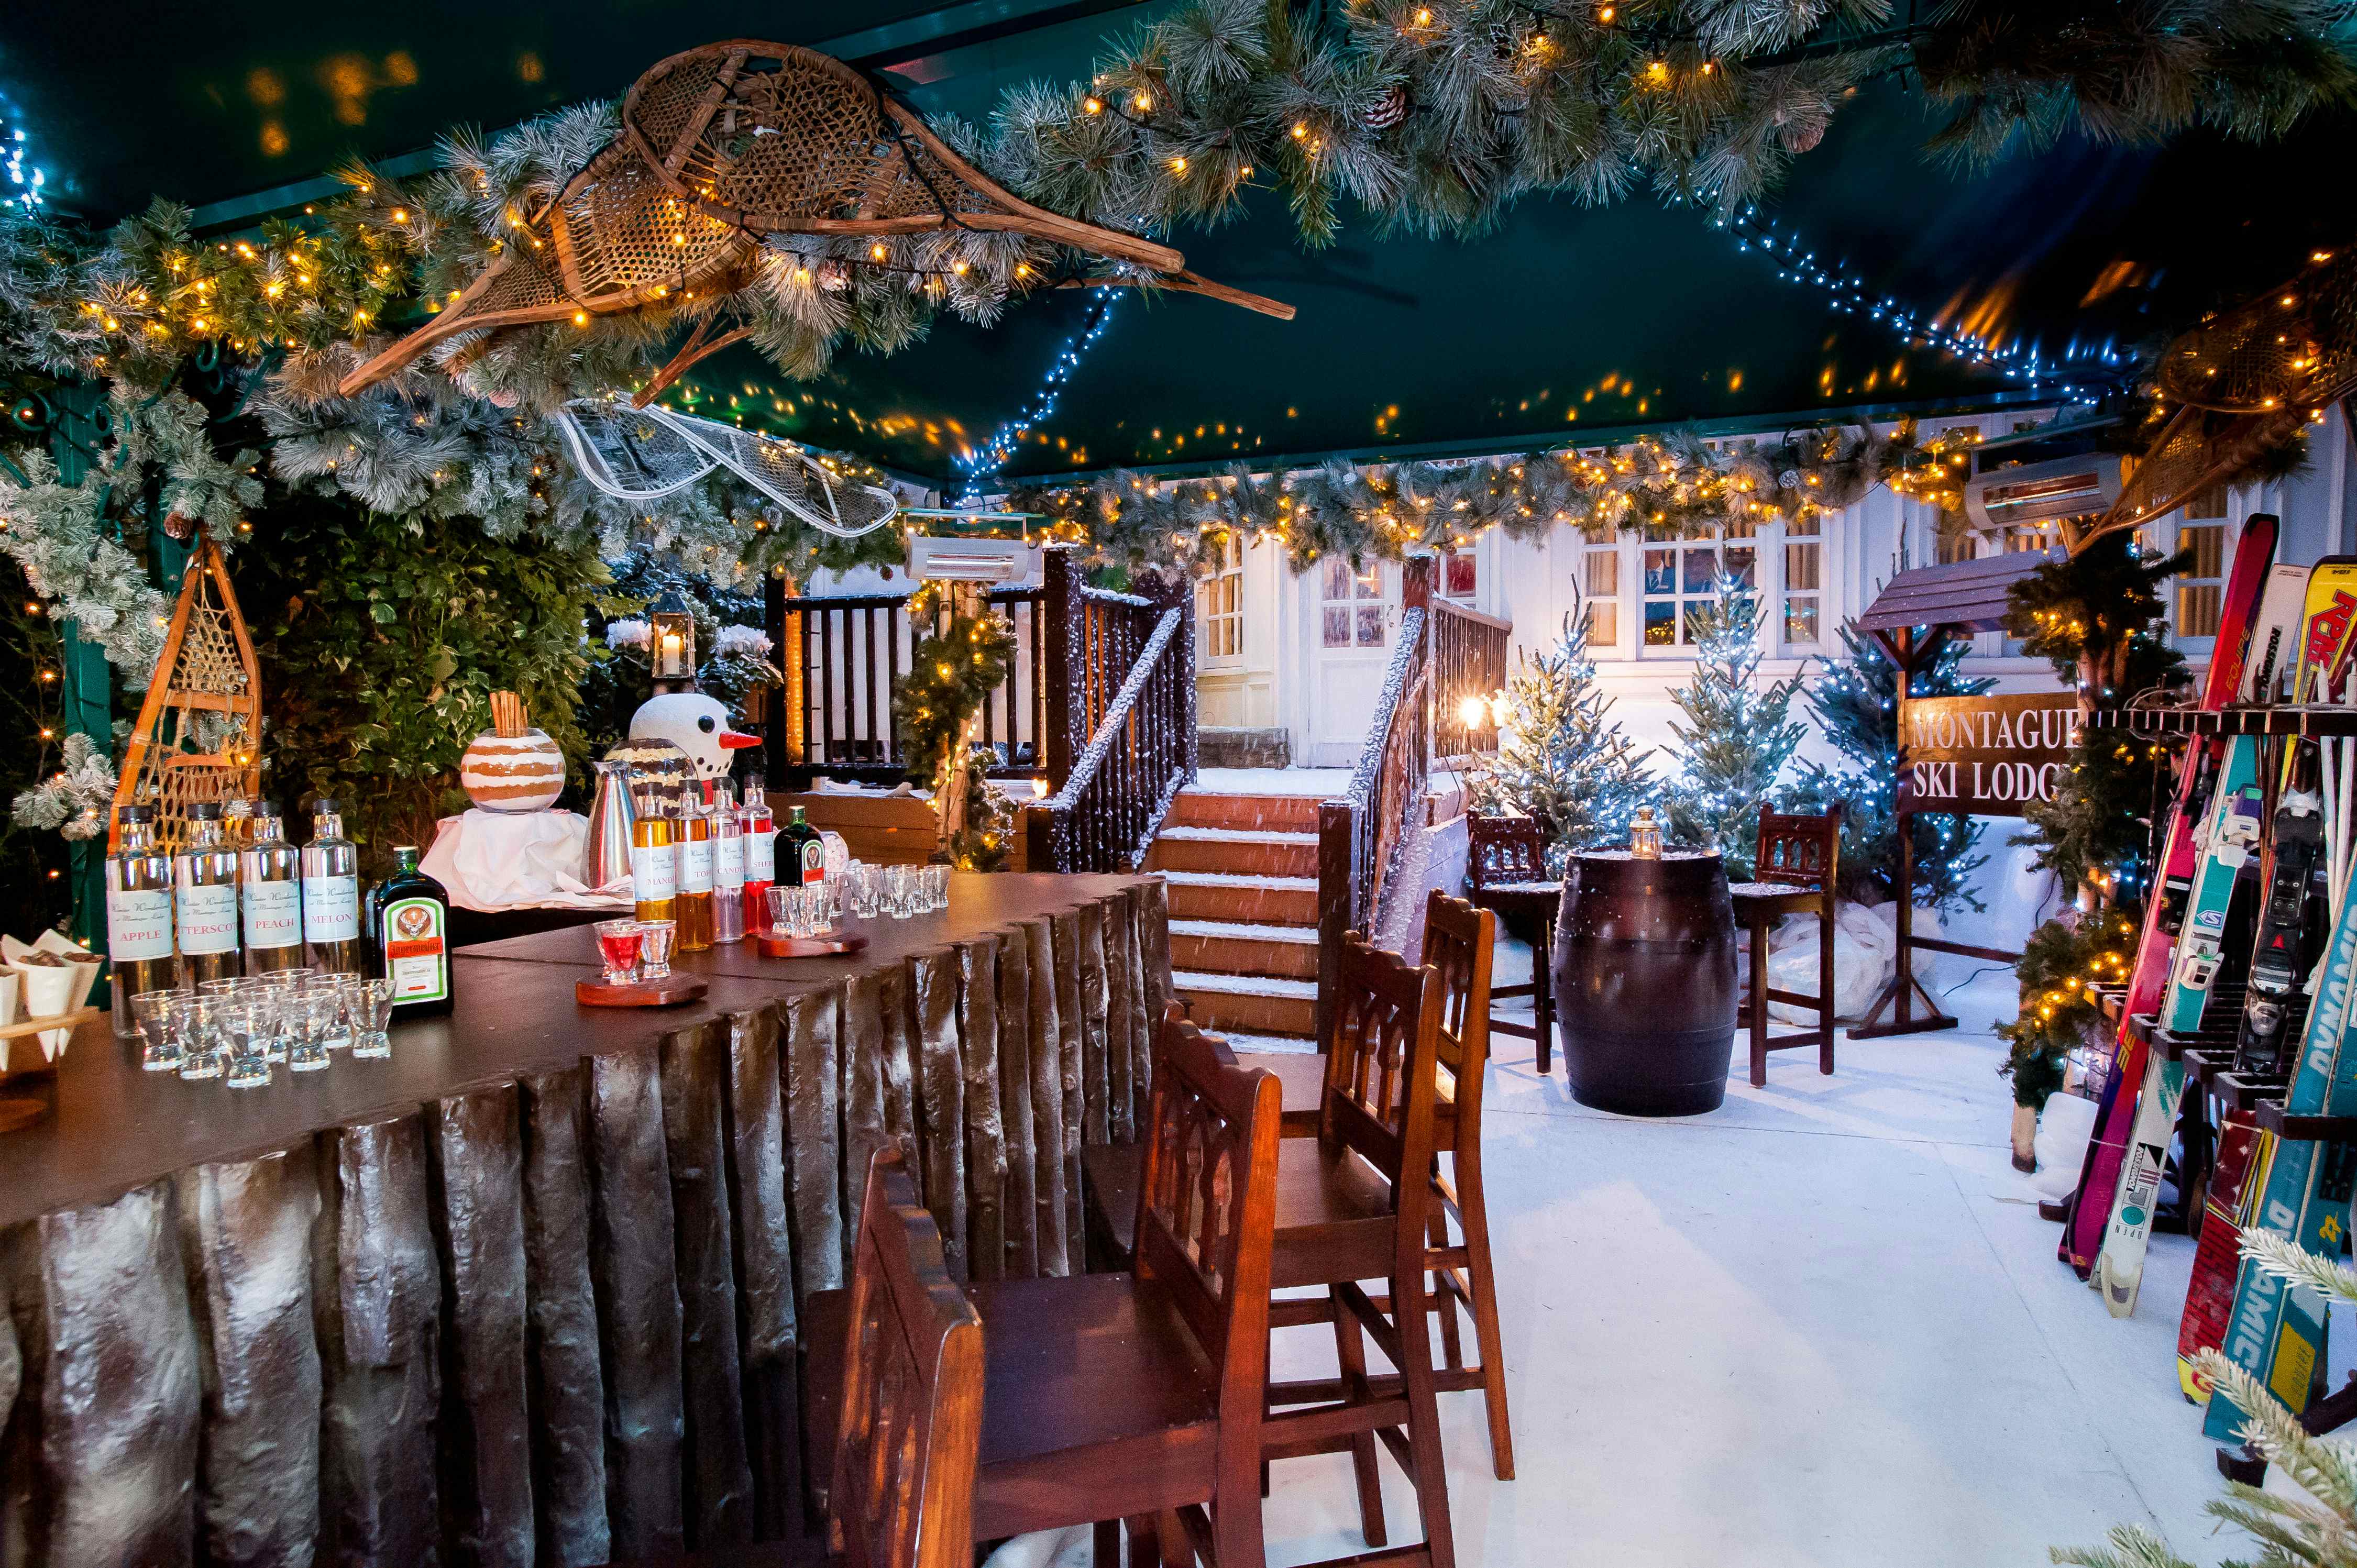 The Ski Lodge, The Montague on the Gardens